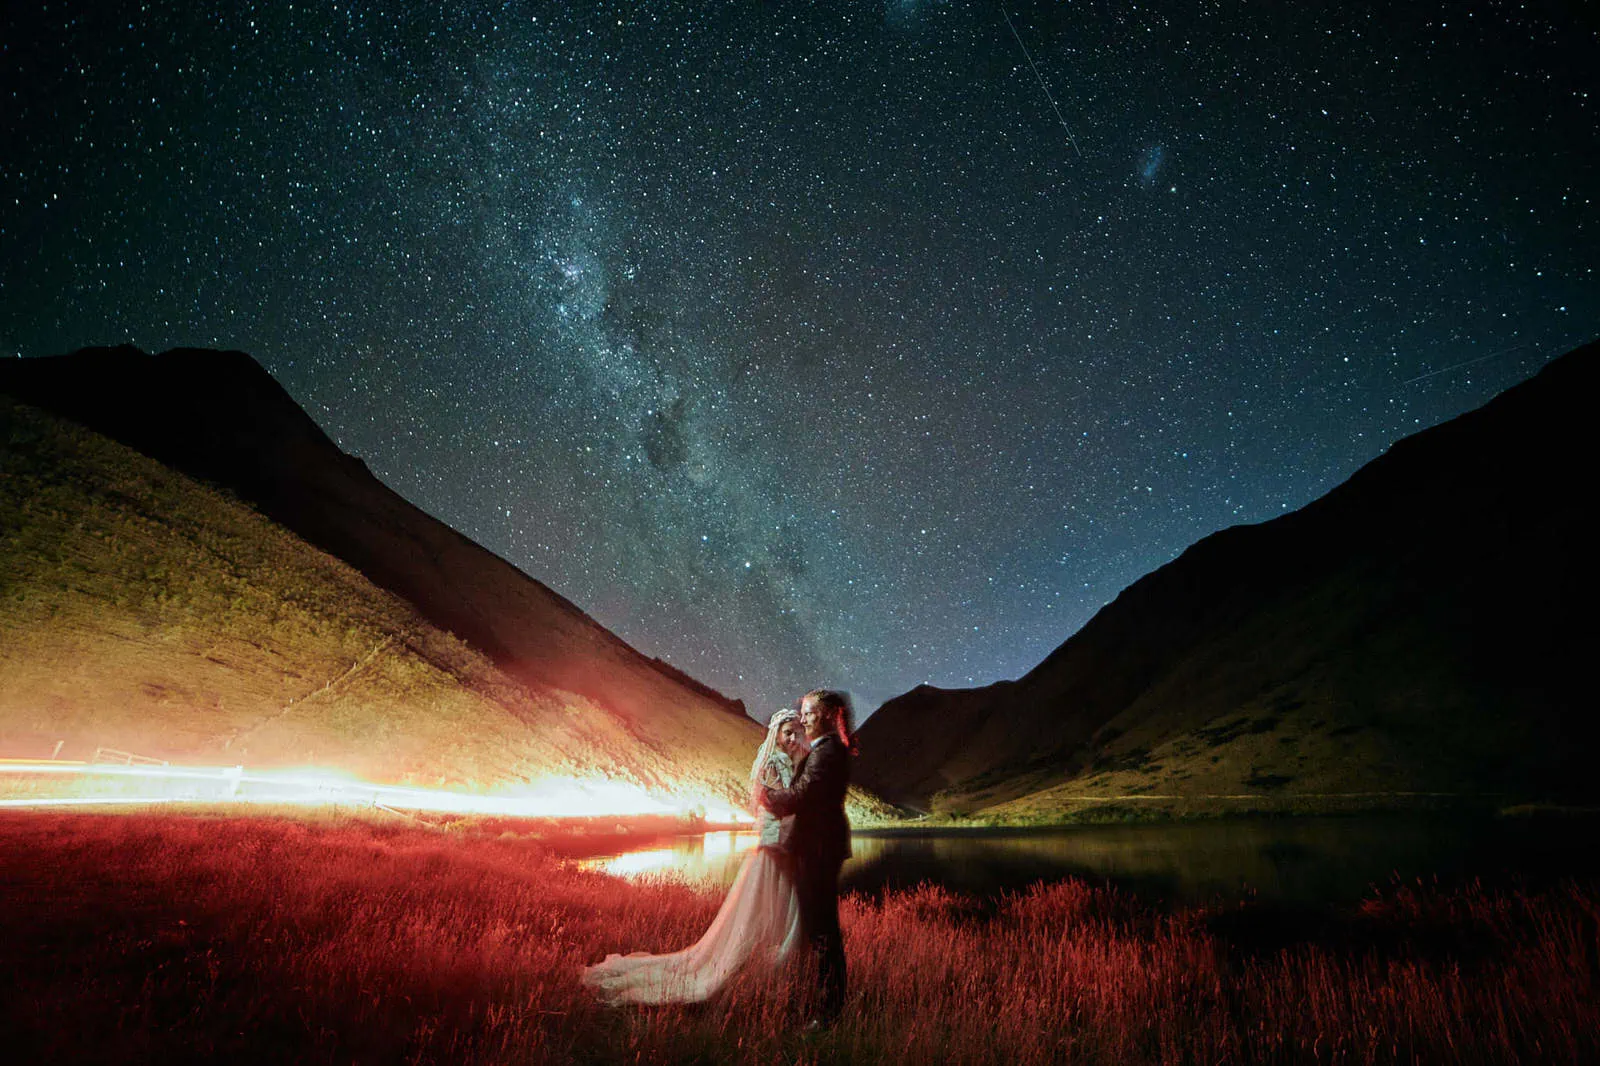 Queenstown New Zealand Elopement Wedding Photographer - A stunning Starry Night shoot capturing the beautiful moment of a bride and groom standing under a starry sky.